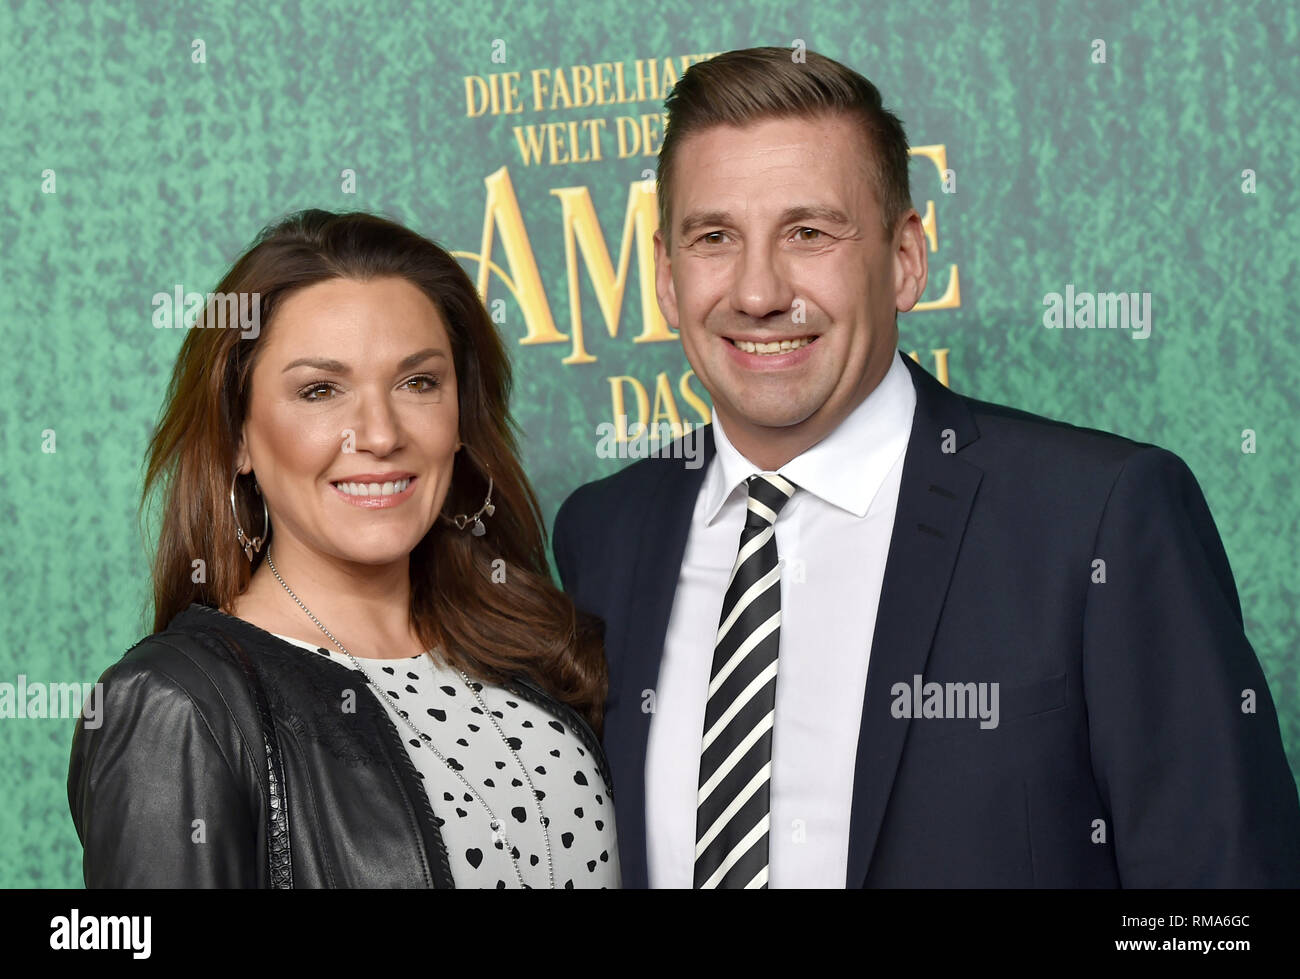 14 February 2019, Bavaria, München: Simone Ballack and Andreas Mecky come  to the premiere of the musical "The Fabulous World of Amelie" in Werk 7  Theater. Photo: Angelika Warmuth/dpa Stock Photo - Alamy